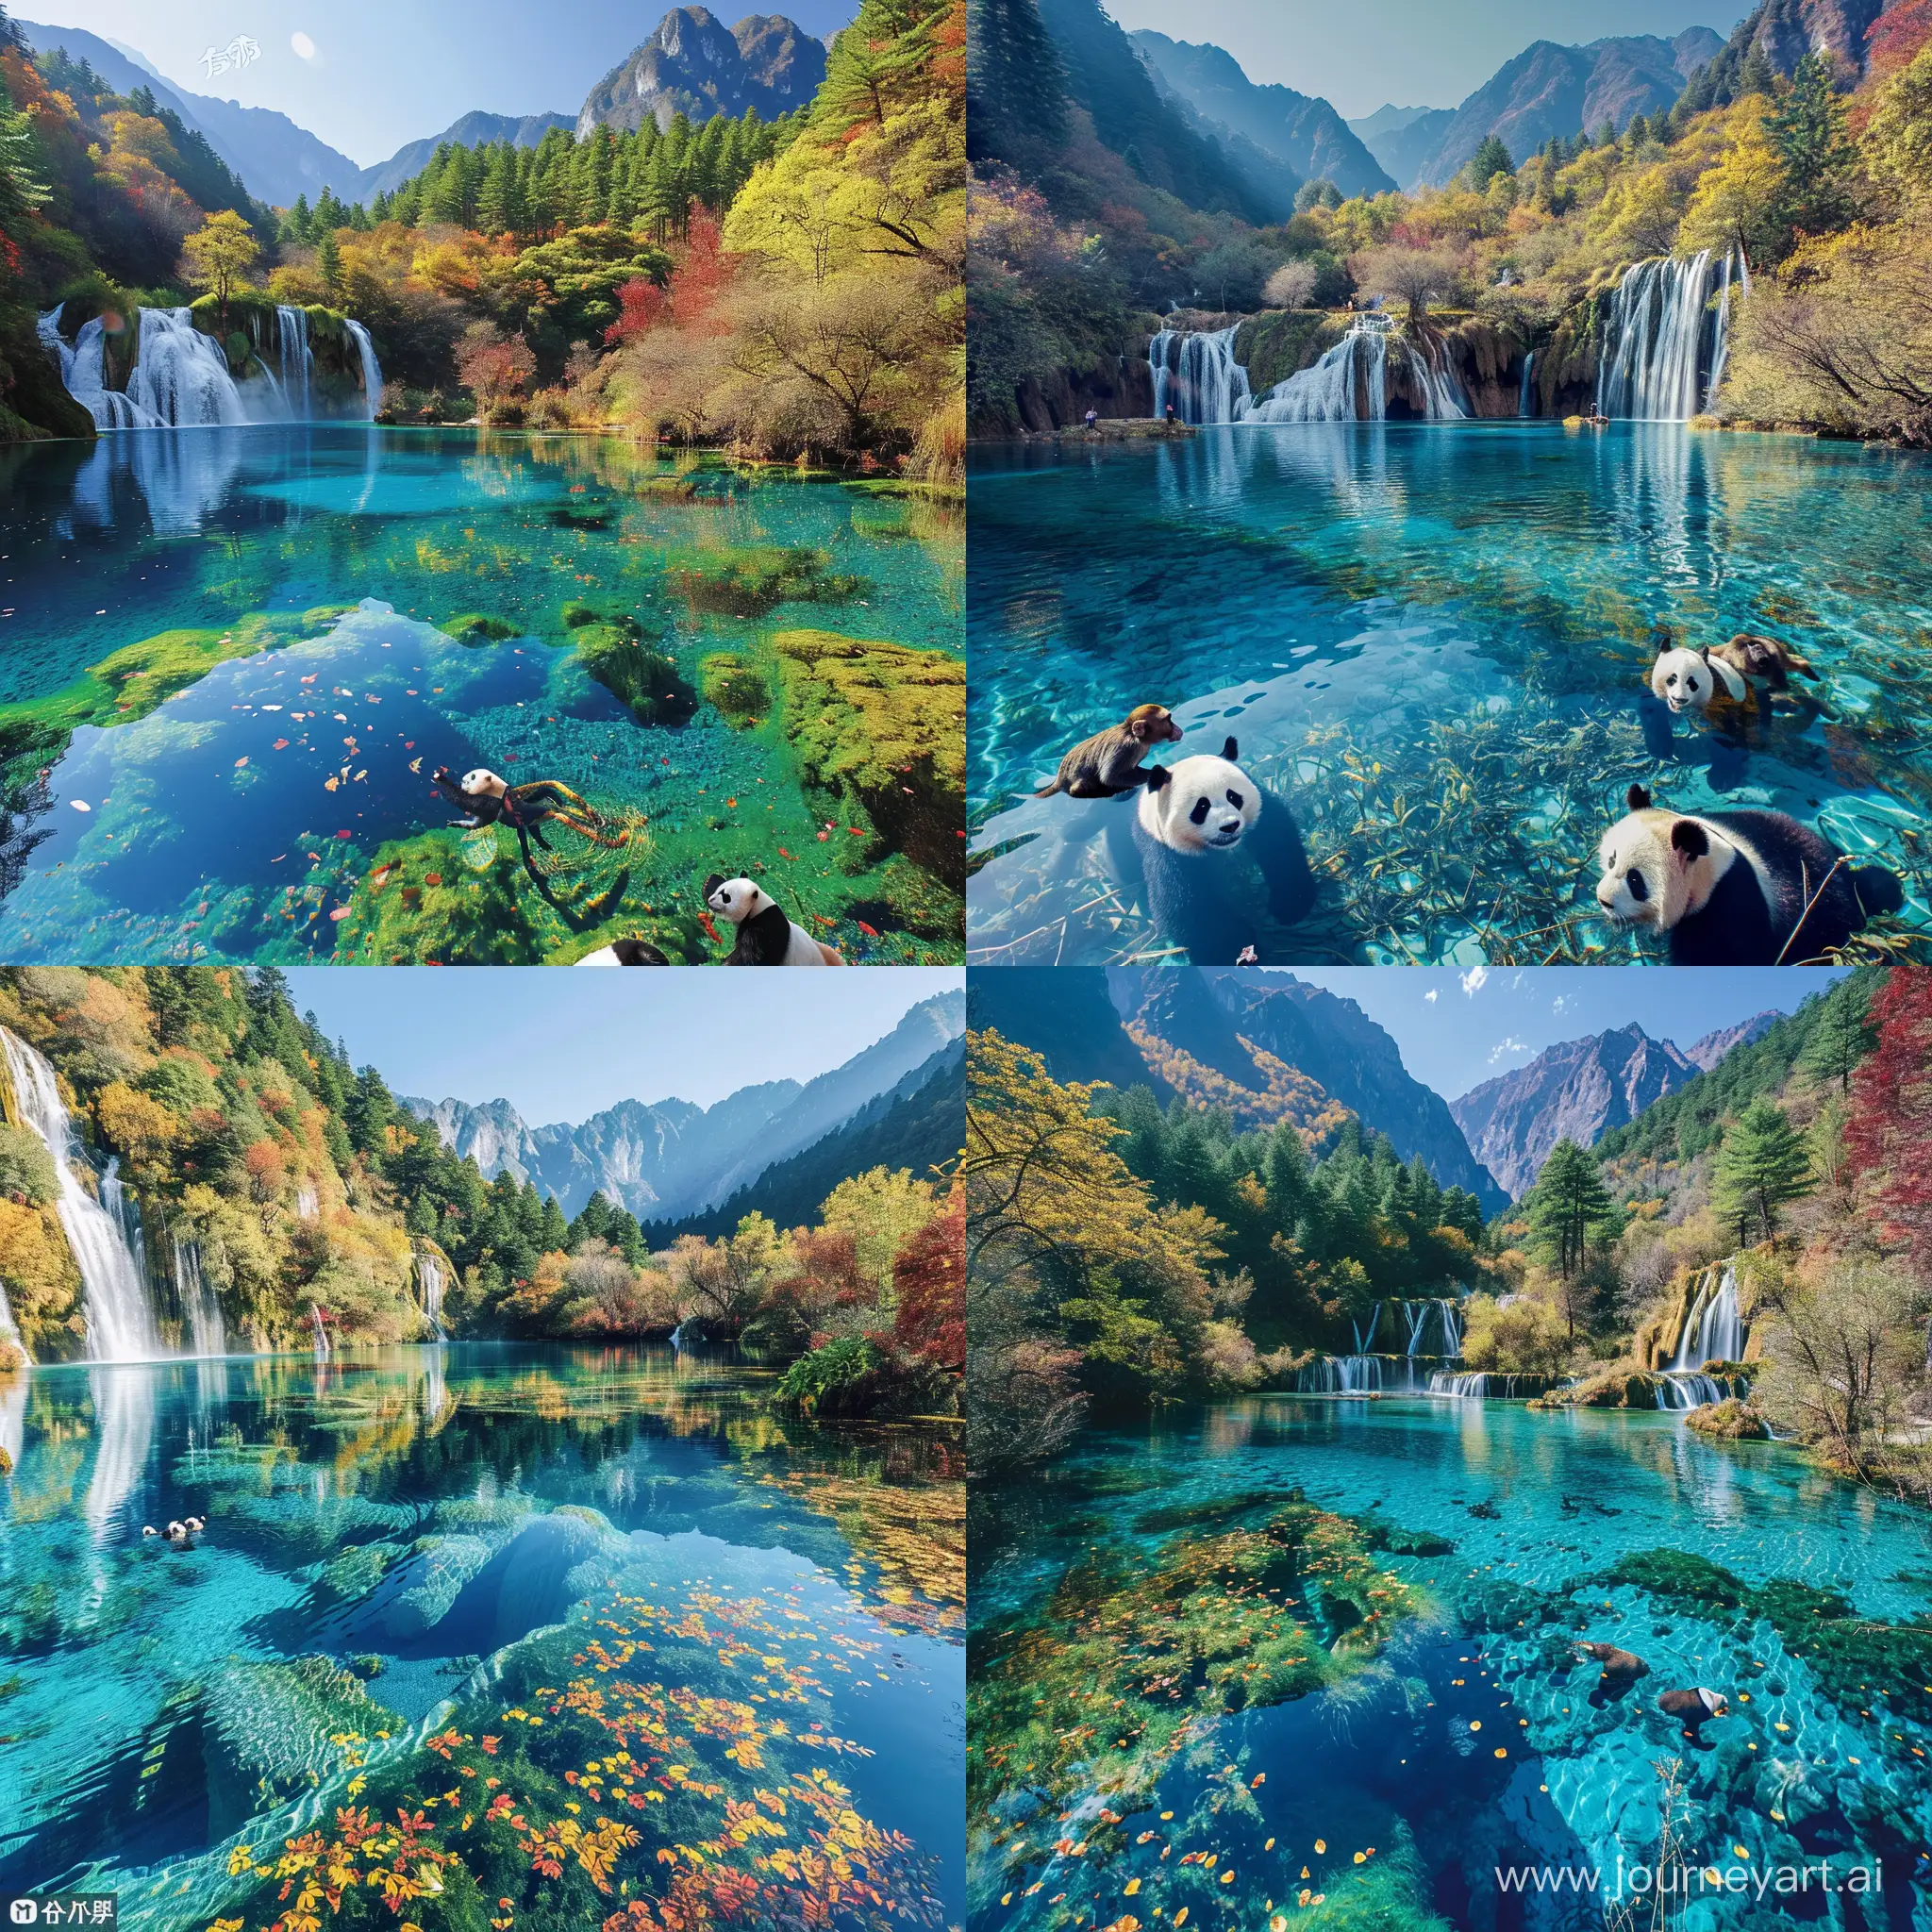 "A serene and picturesque view of Jiuzhaigou Valley with crystal clear blue lakes, cascading waterfalls surrounded by lush green forests and vibrant autumn foliage. Peaceful pandas and playful Tibetan macaques are seen enjoying the natural habitat, with the reflections of the majestic Min Mountains in the tranquil waters, under a clear azure sky, in the style of a National Geographic photograph."